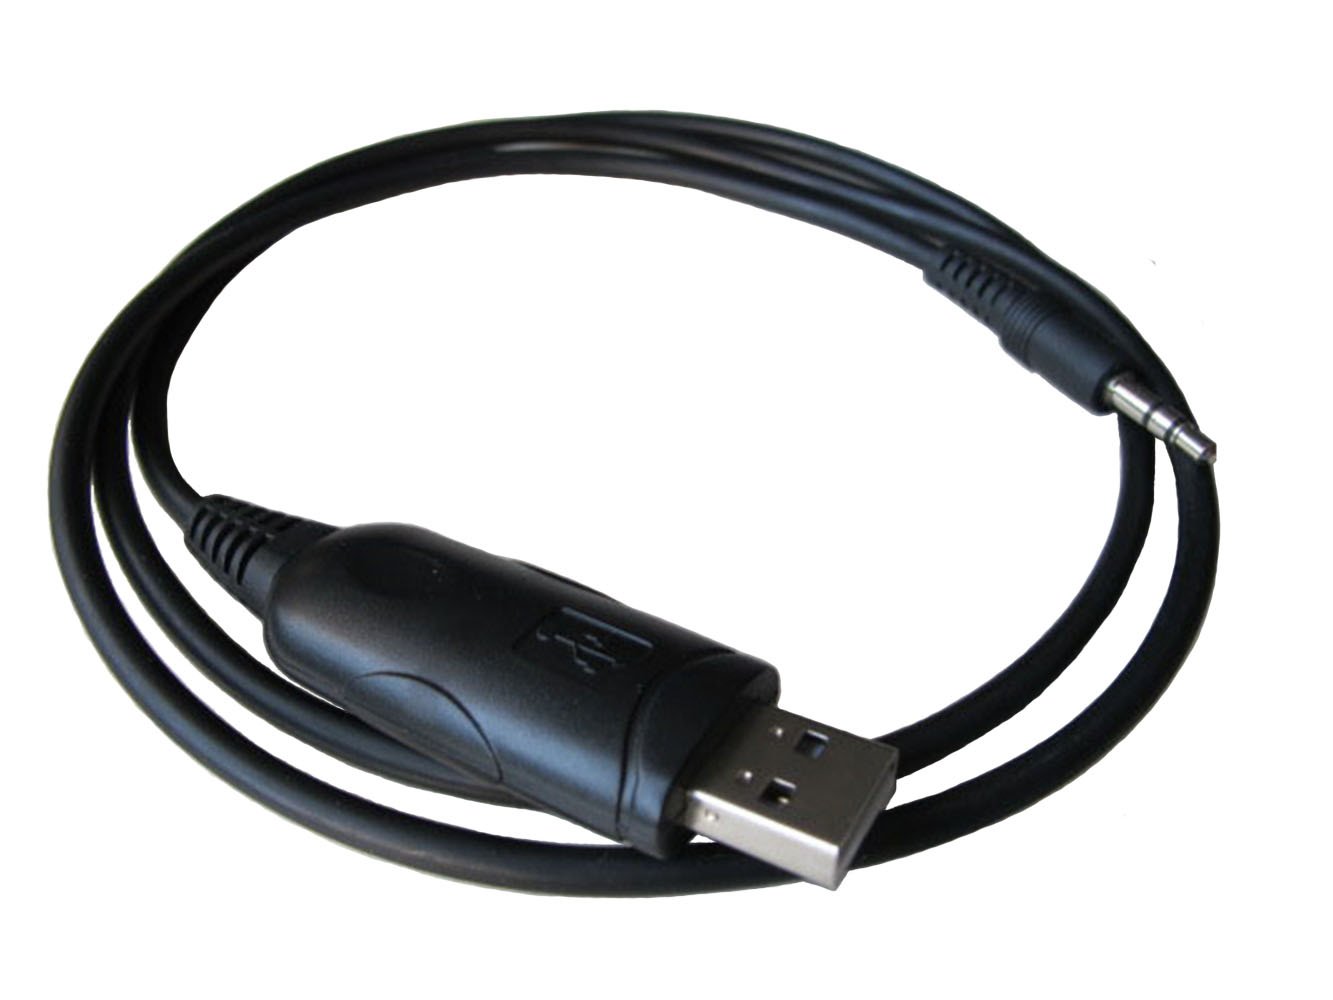 bestkong USB Programming cable for Icom Ic-207H Ic-208H Ic-2100H Ic-2800 Ic-F3001 Ic-F3021 Ic-F3023 Ic-F3011 F3022 OPc-478 OPc-4